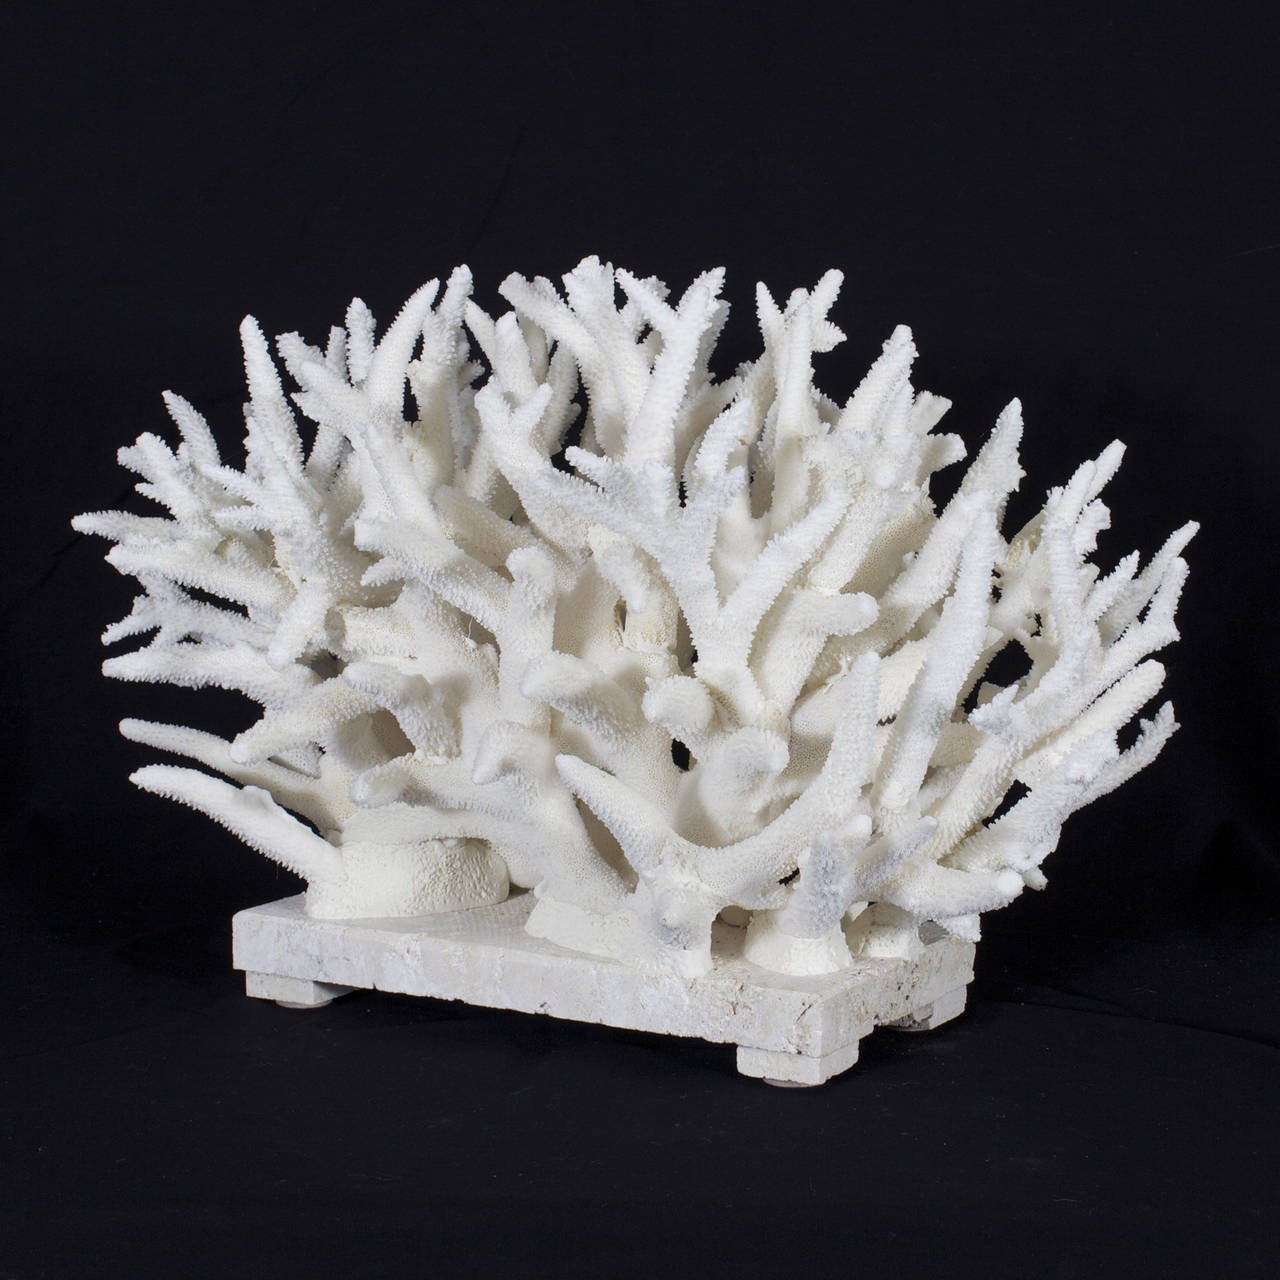 A white coral staghorn sculpture, many pieces of white staghorn coral, carefully selected, hand cut and artistically assembled on coquina stone, creating this dynamic coral stone sculpture.